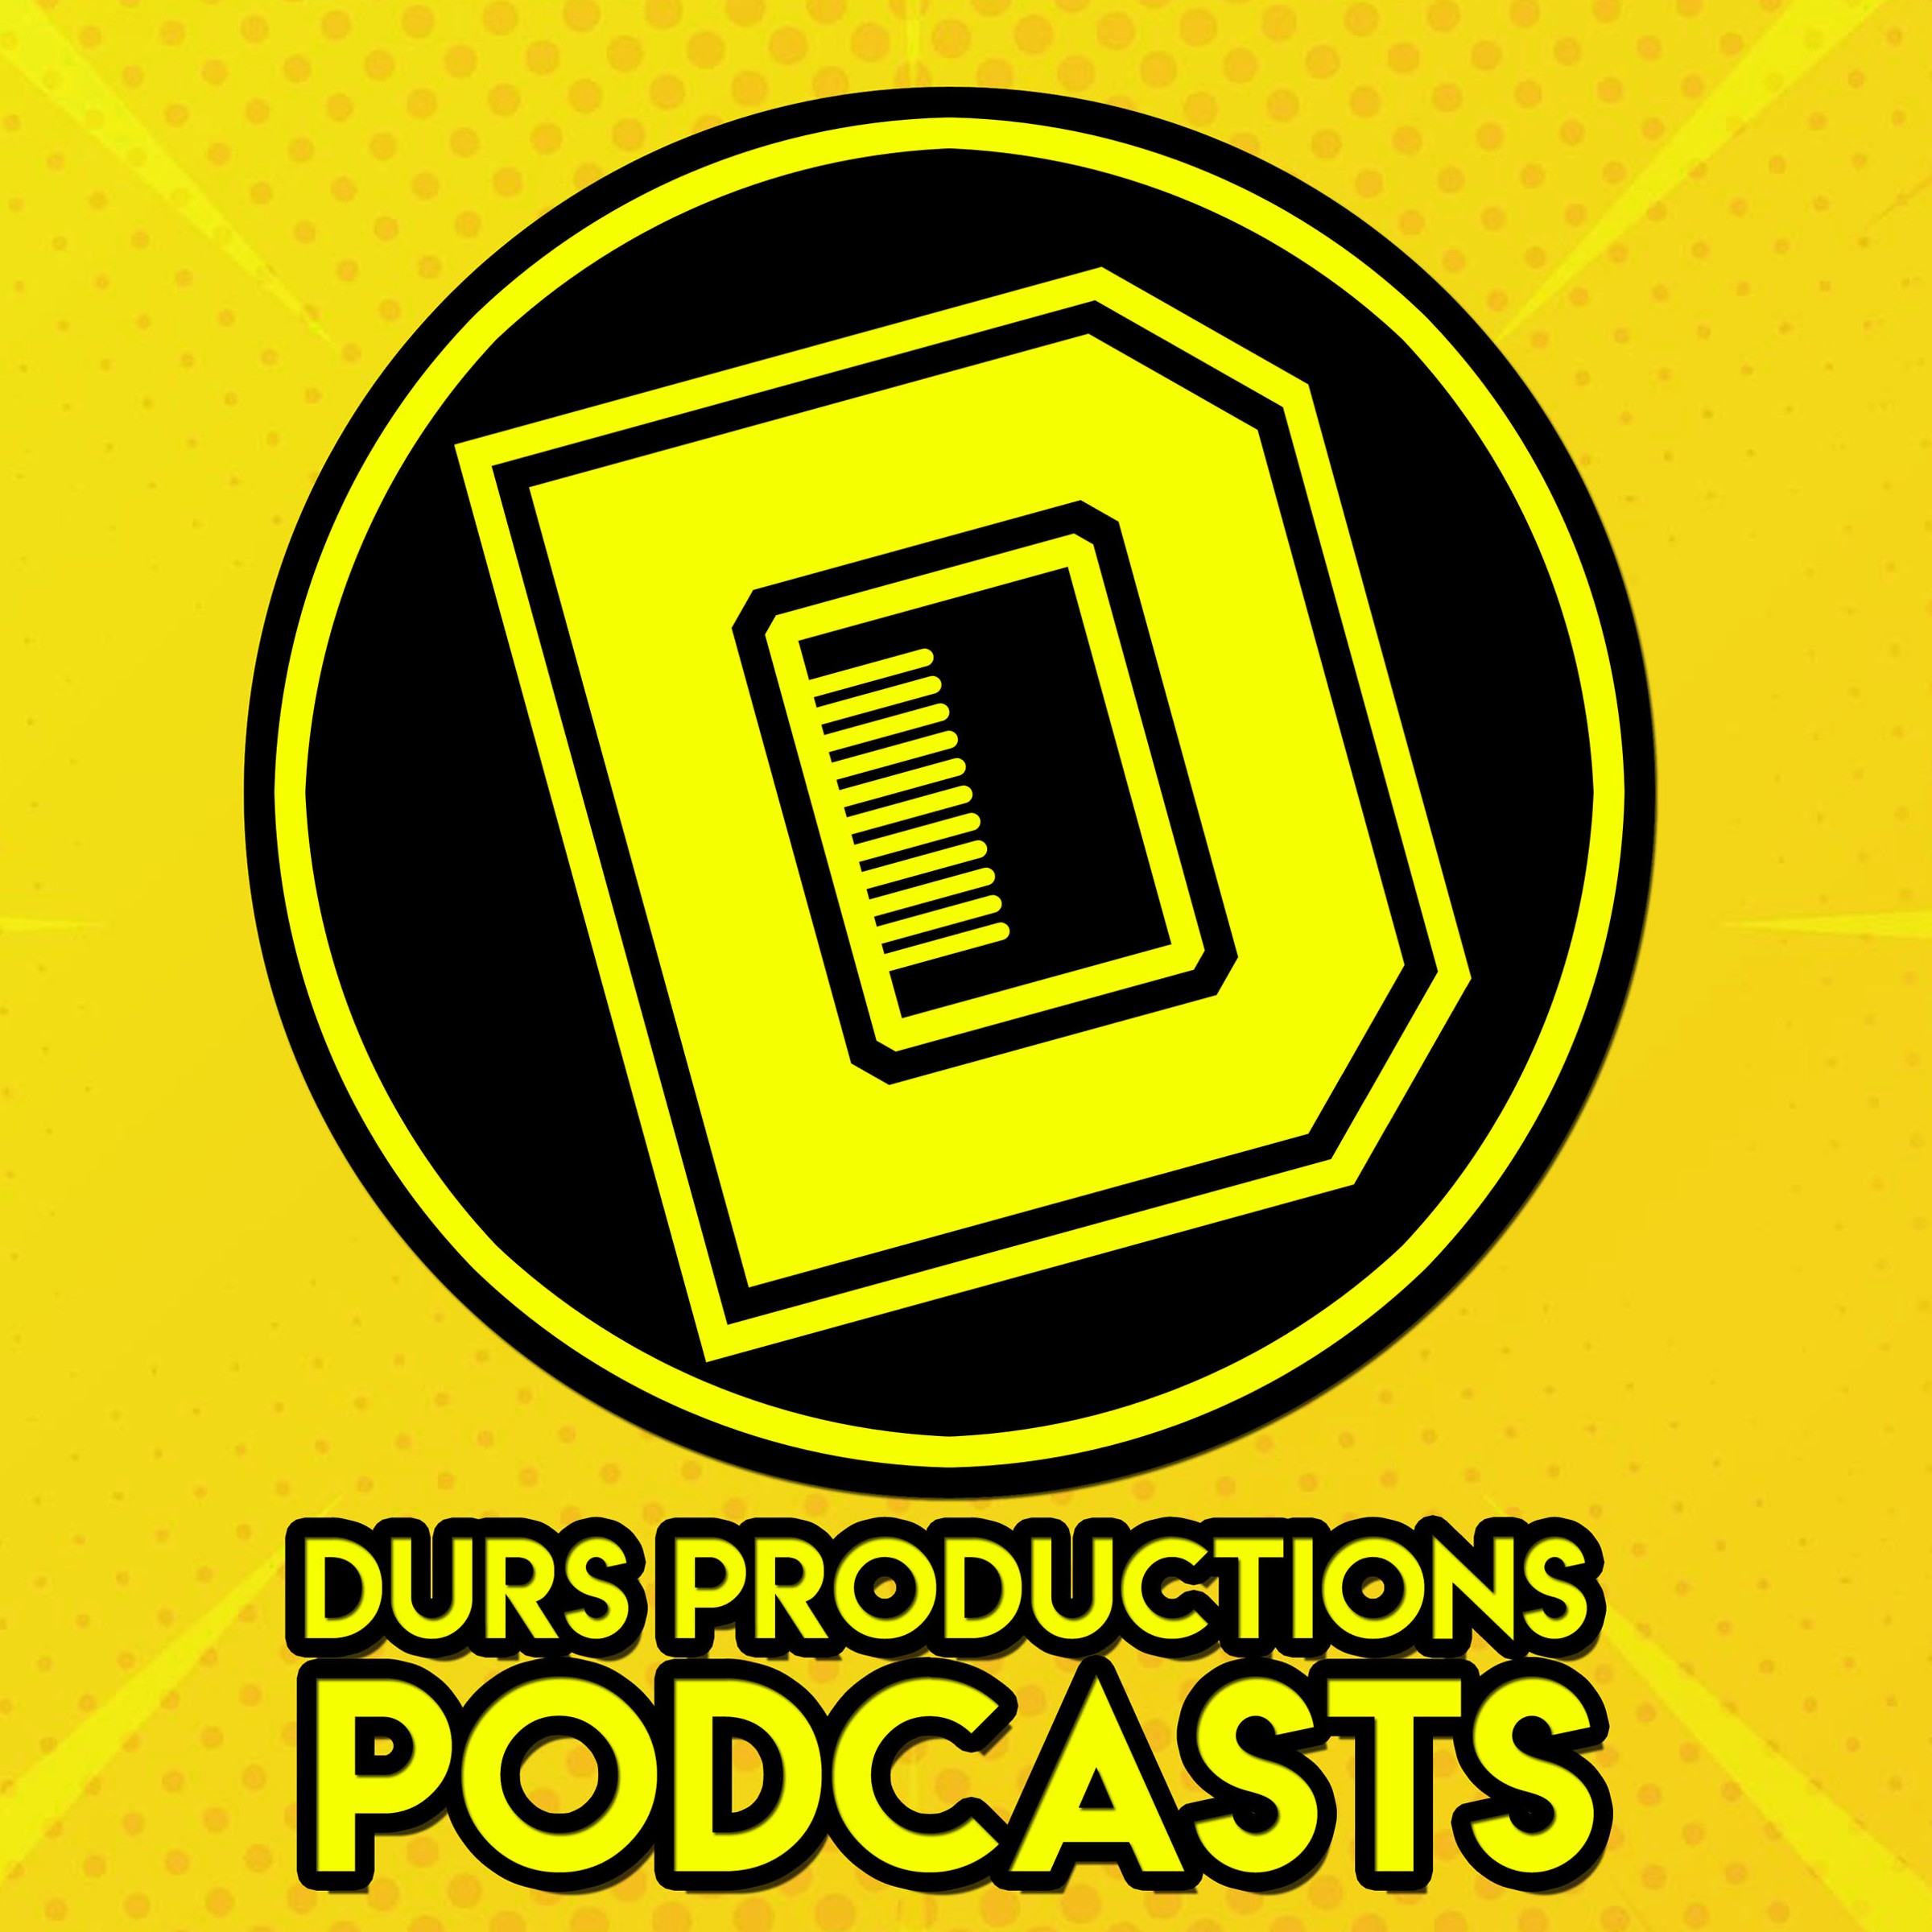 Durs Productions Podcasts